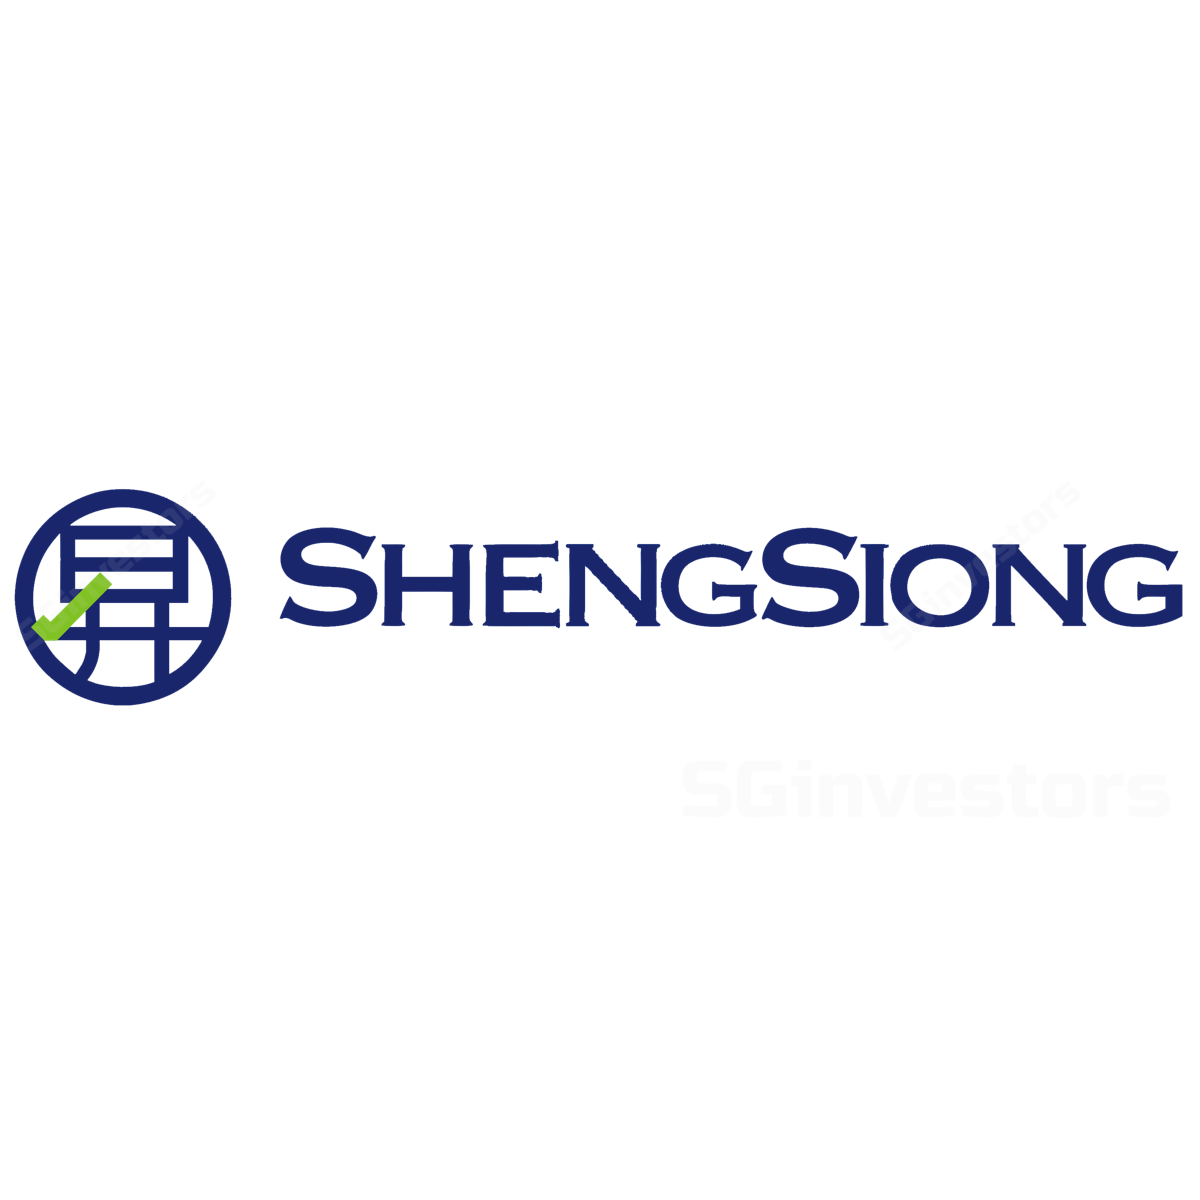 Sheng Siong Group - DBS Vickers 2017-07-28: CONTINUES DELIVERING